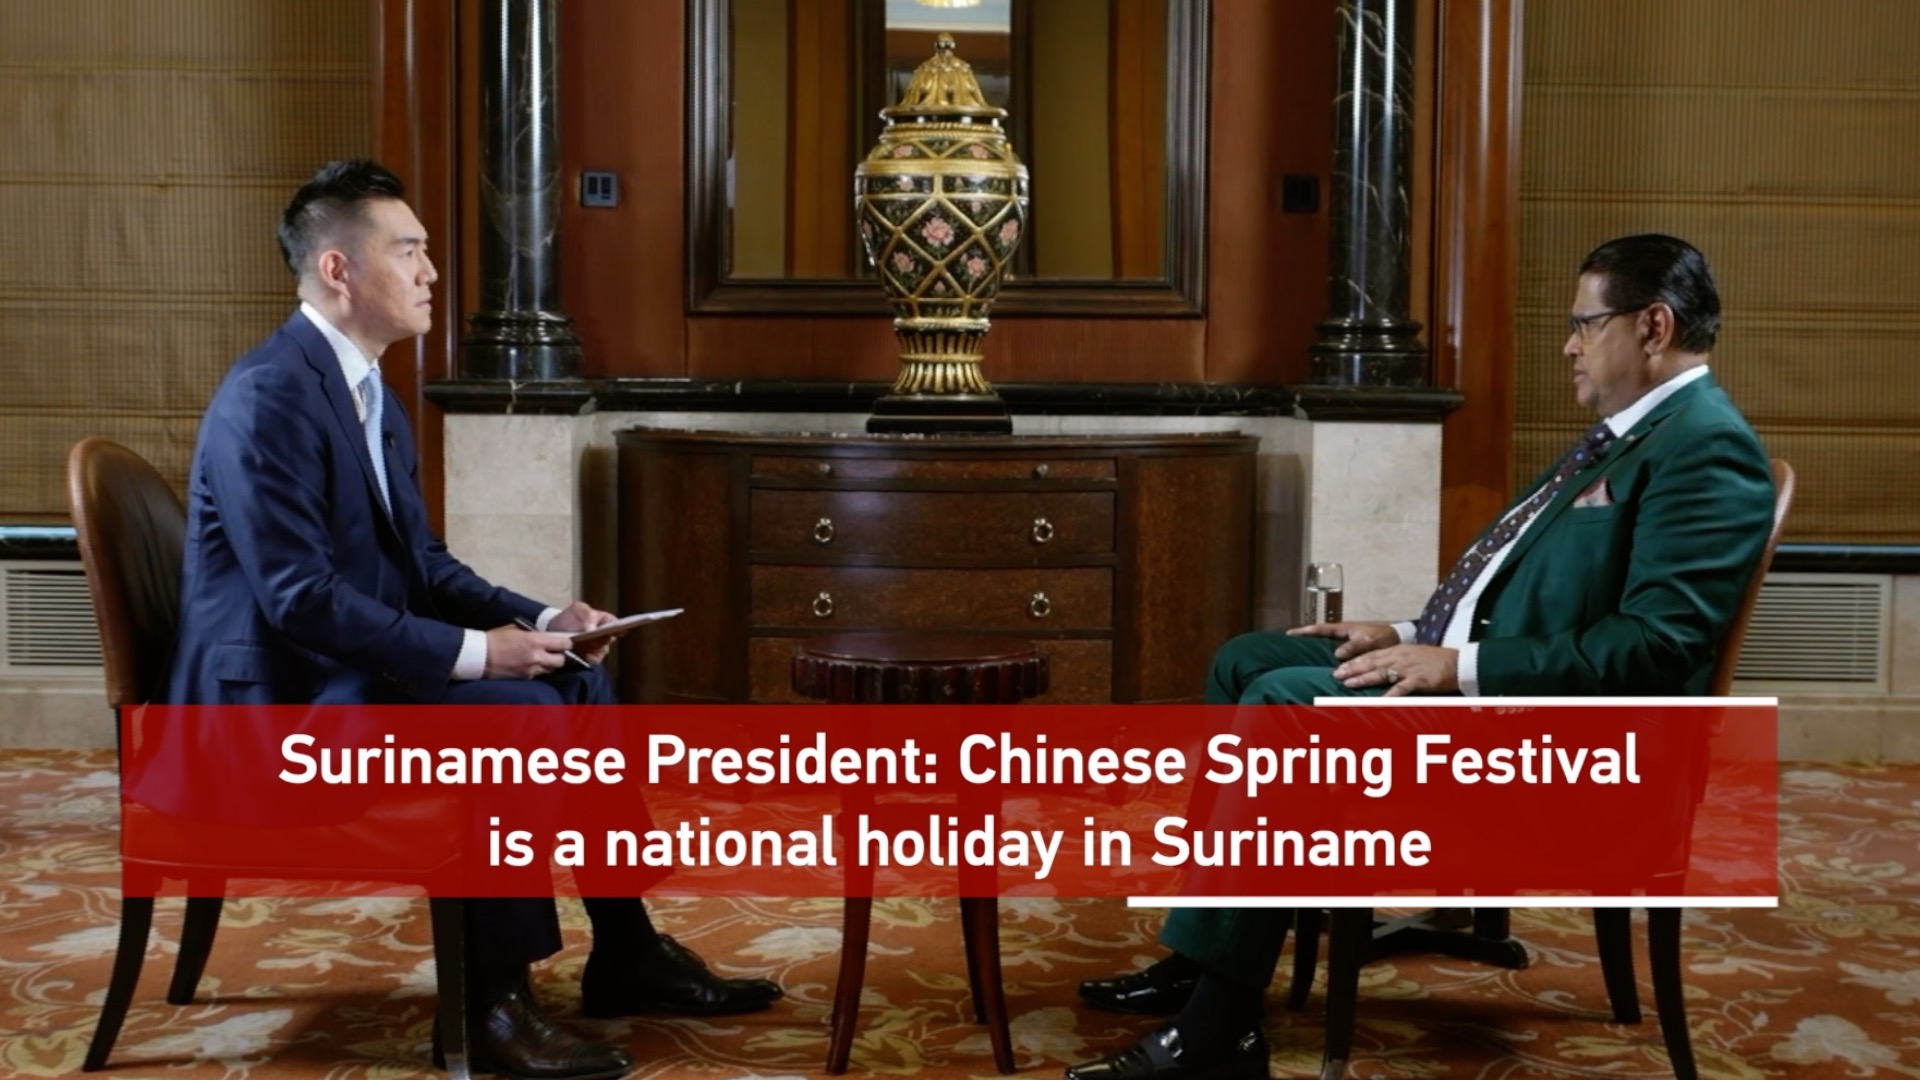 Chinese Spring Festival is a national holiday in Suriname: President